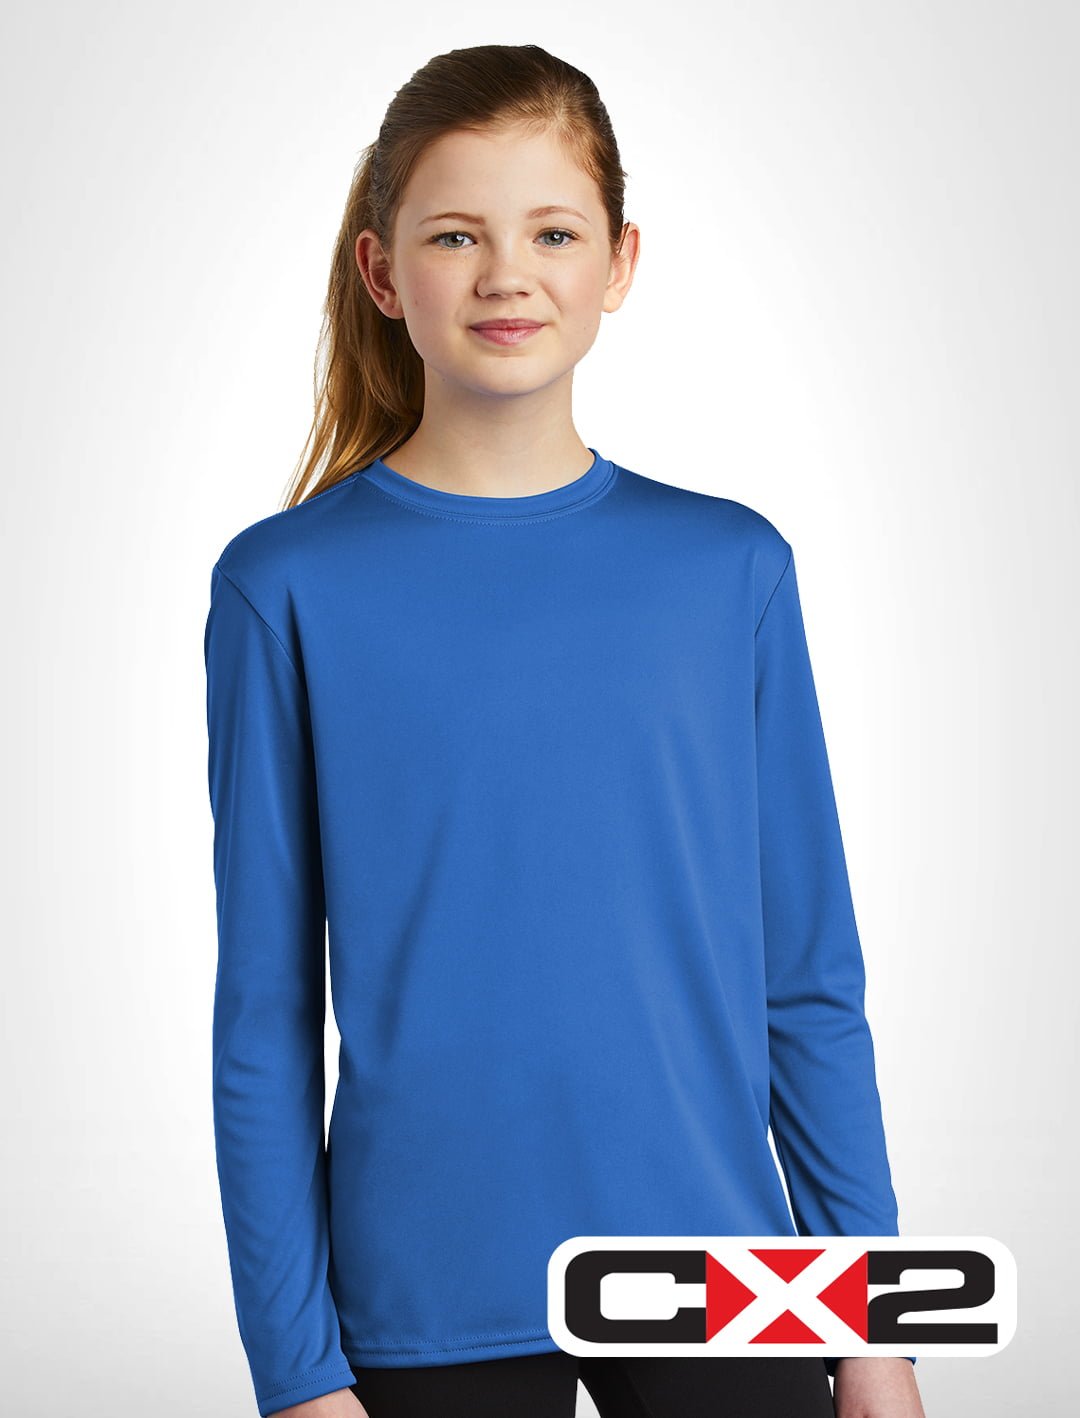 CX2 Youth Shore Long Sleeve Performance Tee #S5937Y